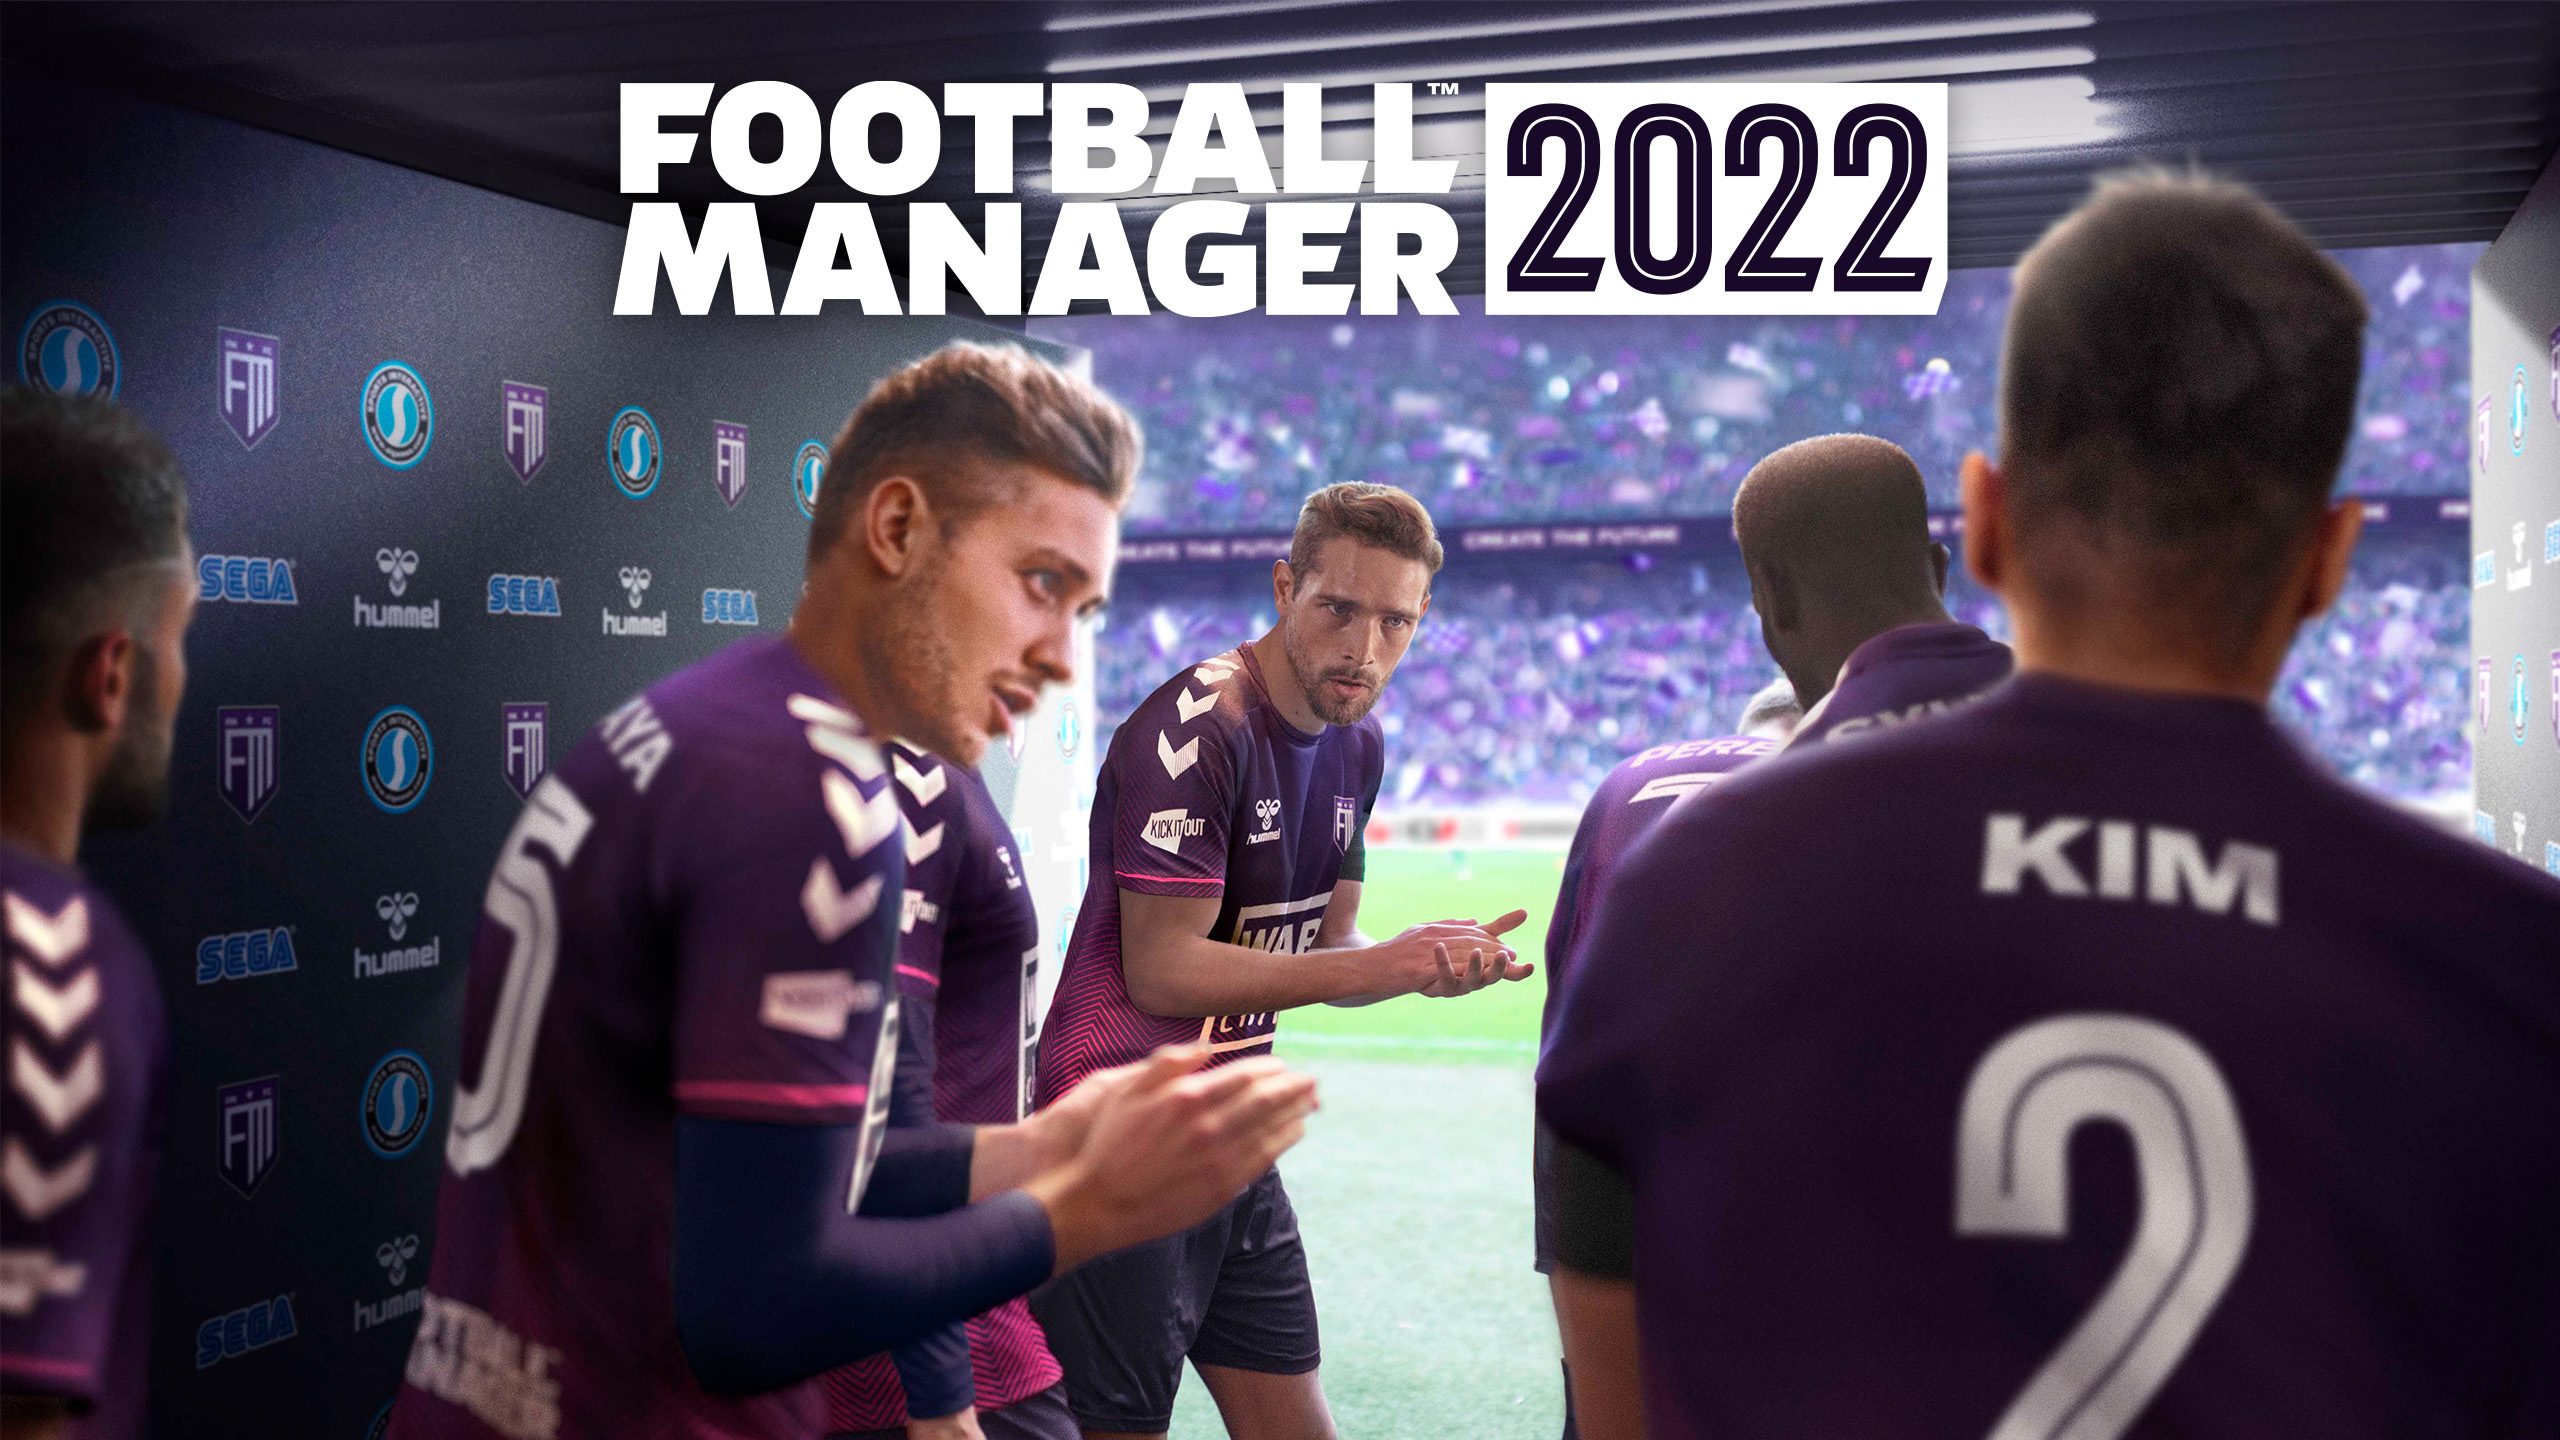 Football Manager 2022 Crack Serial Key Free Download [Latest]